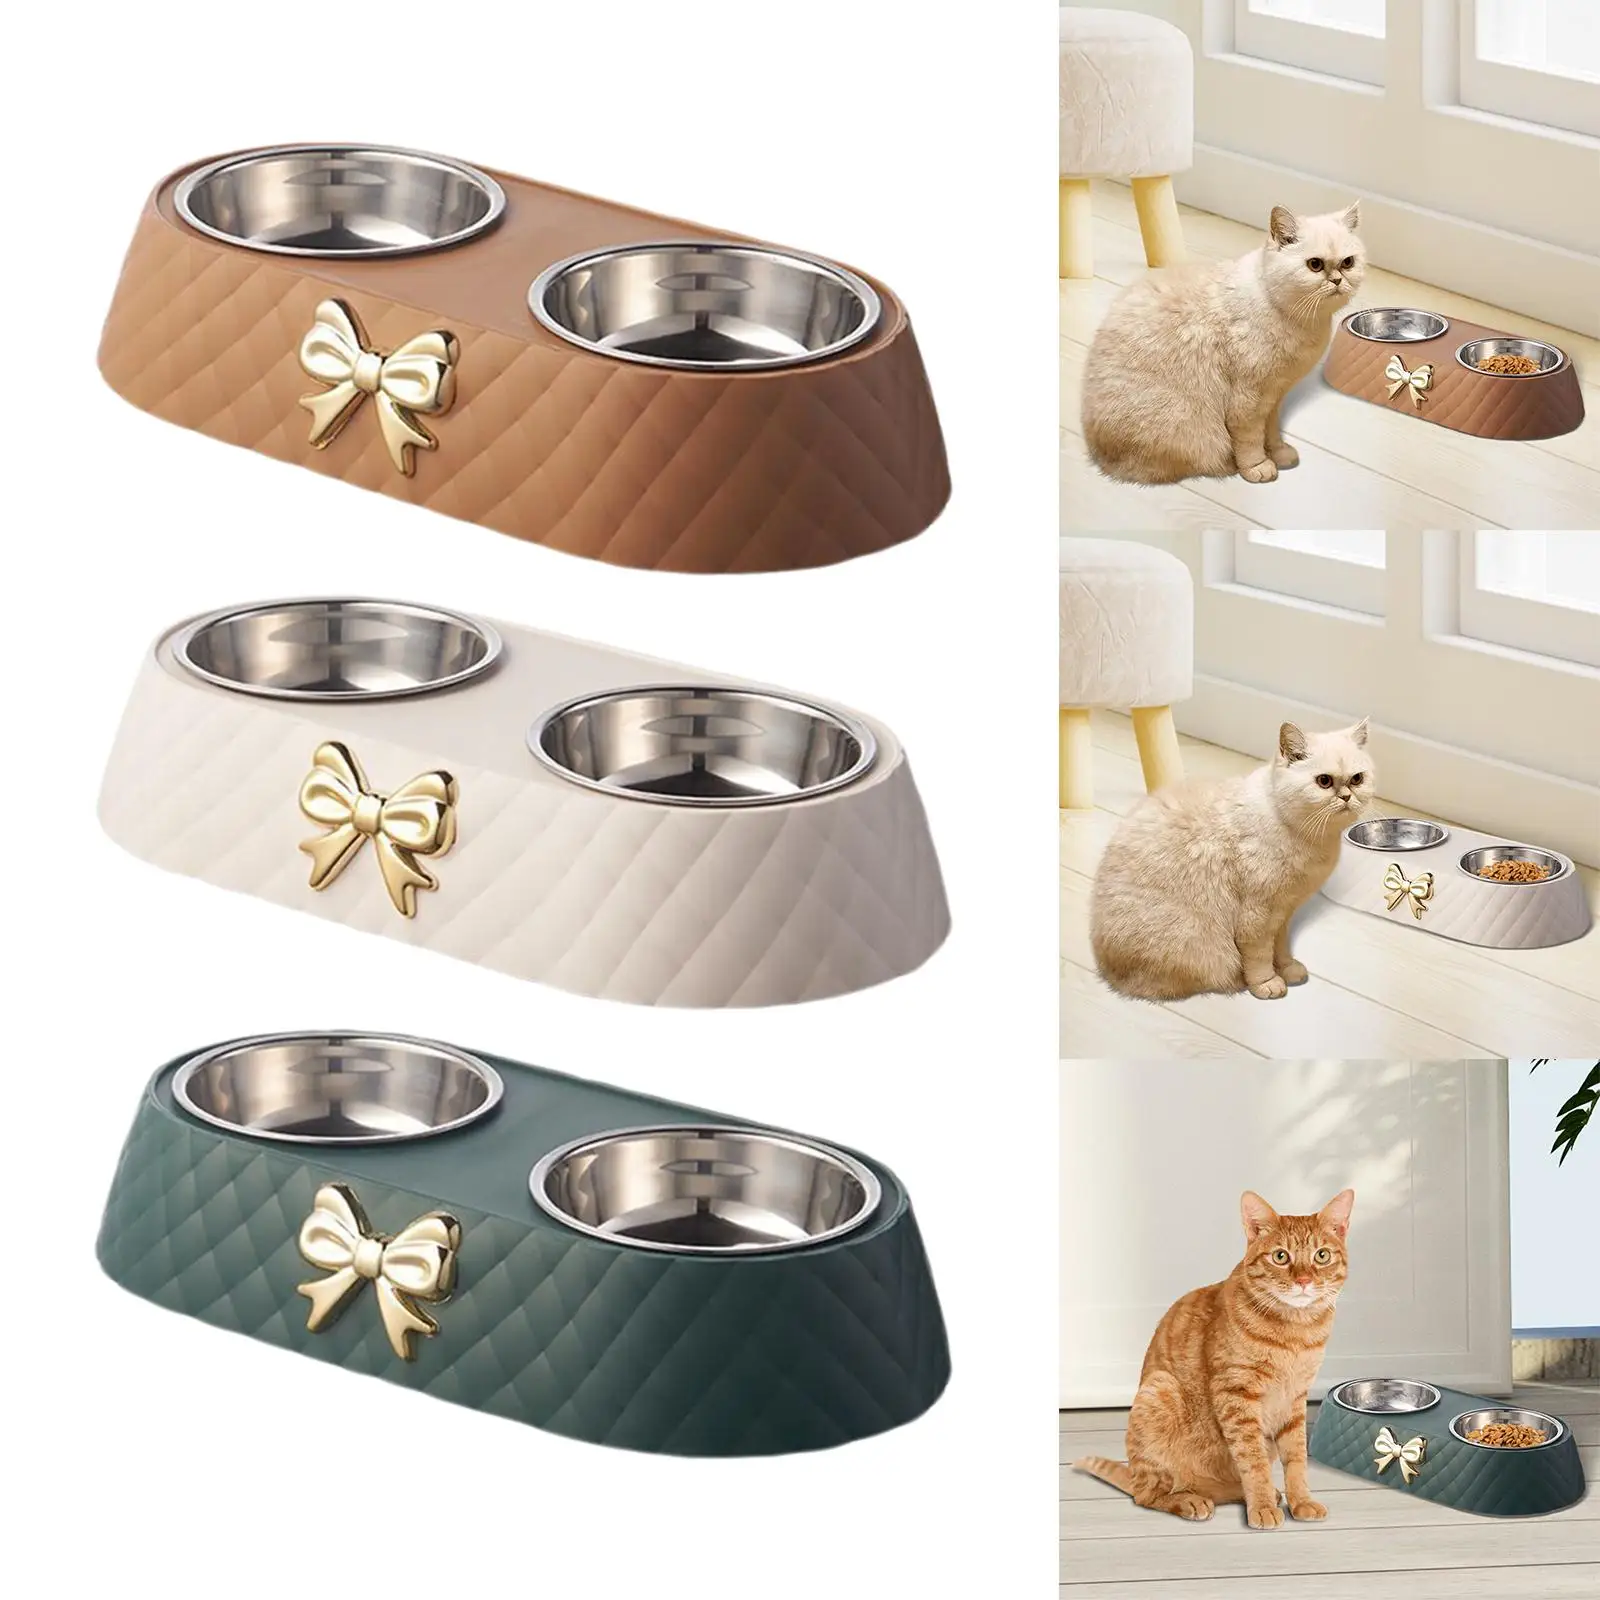 Dog Cat Double Bowls Stainless Steel Pet Bowls Anti Slip Accessories Simple to Clean Convenient for Small Dogs Puppy Durable